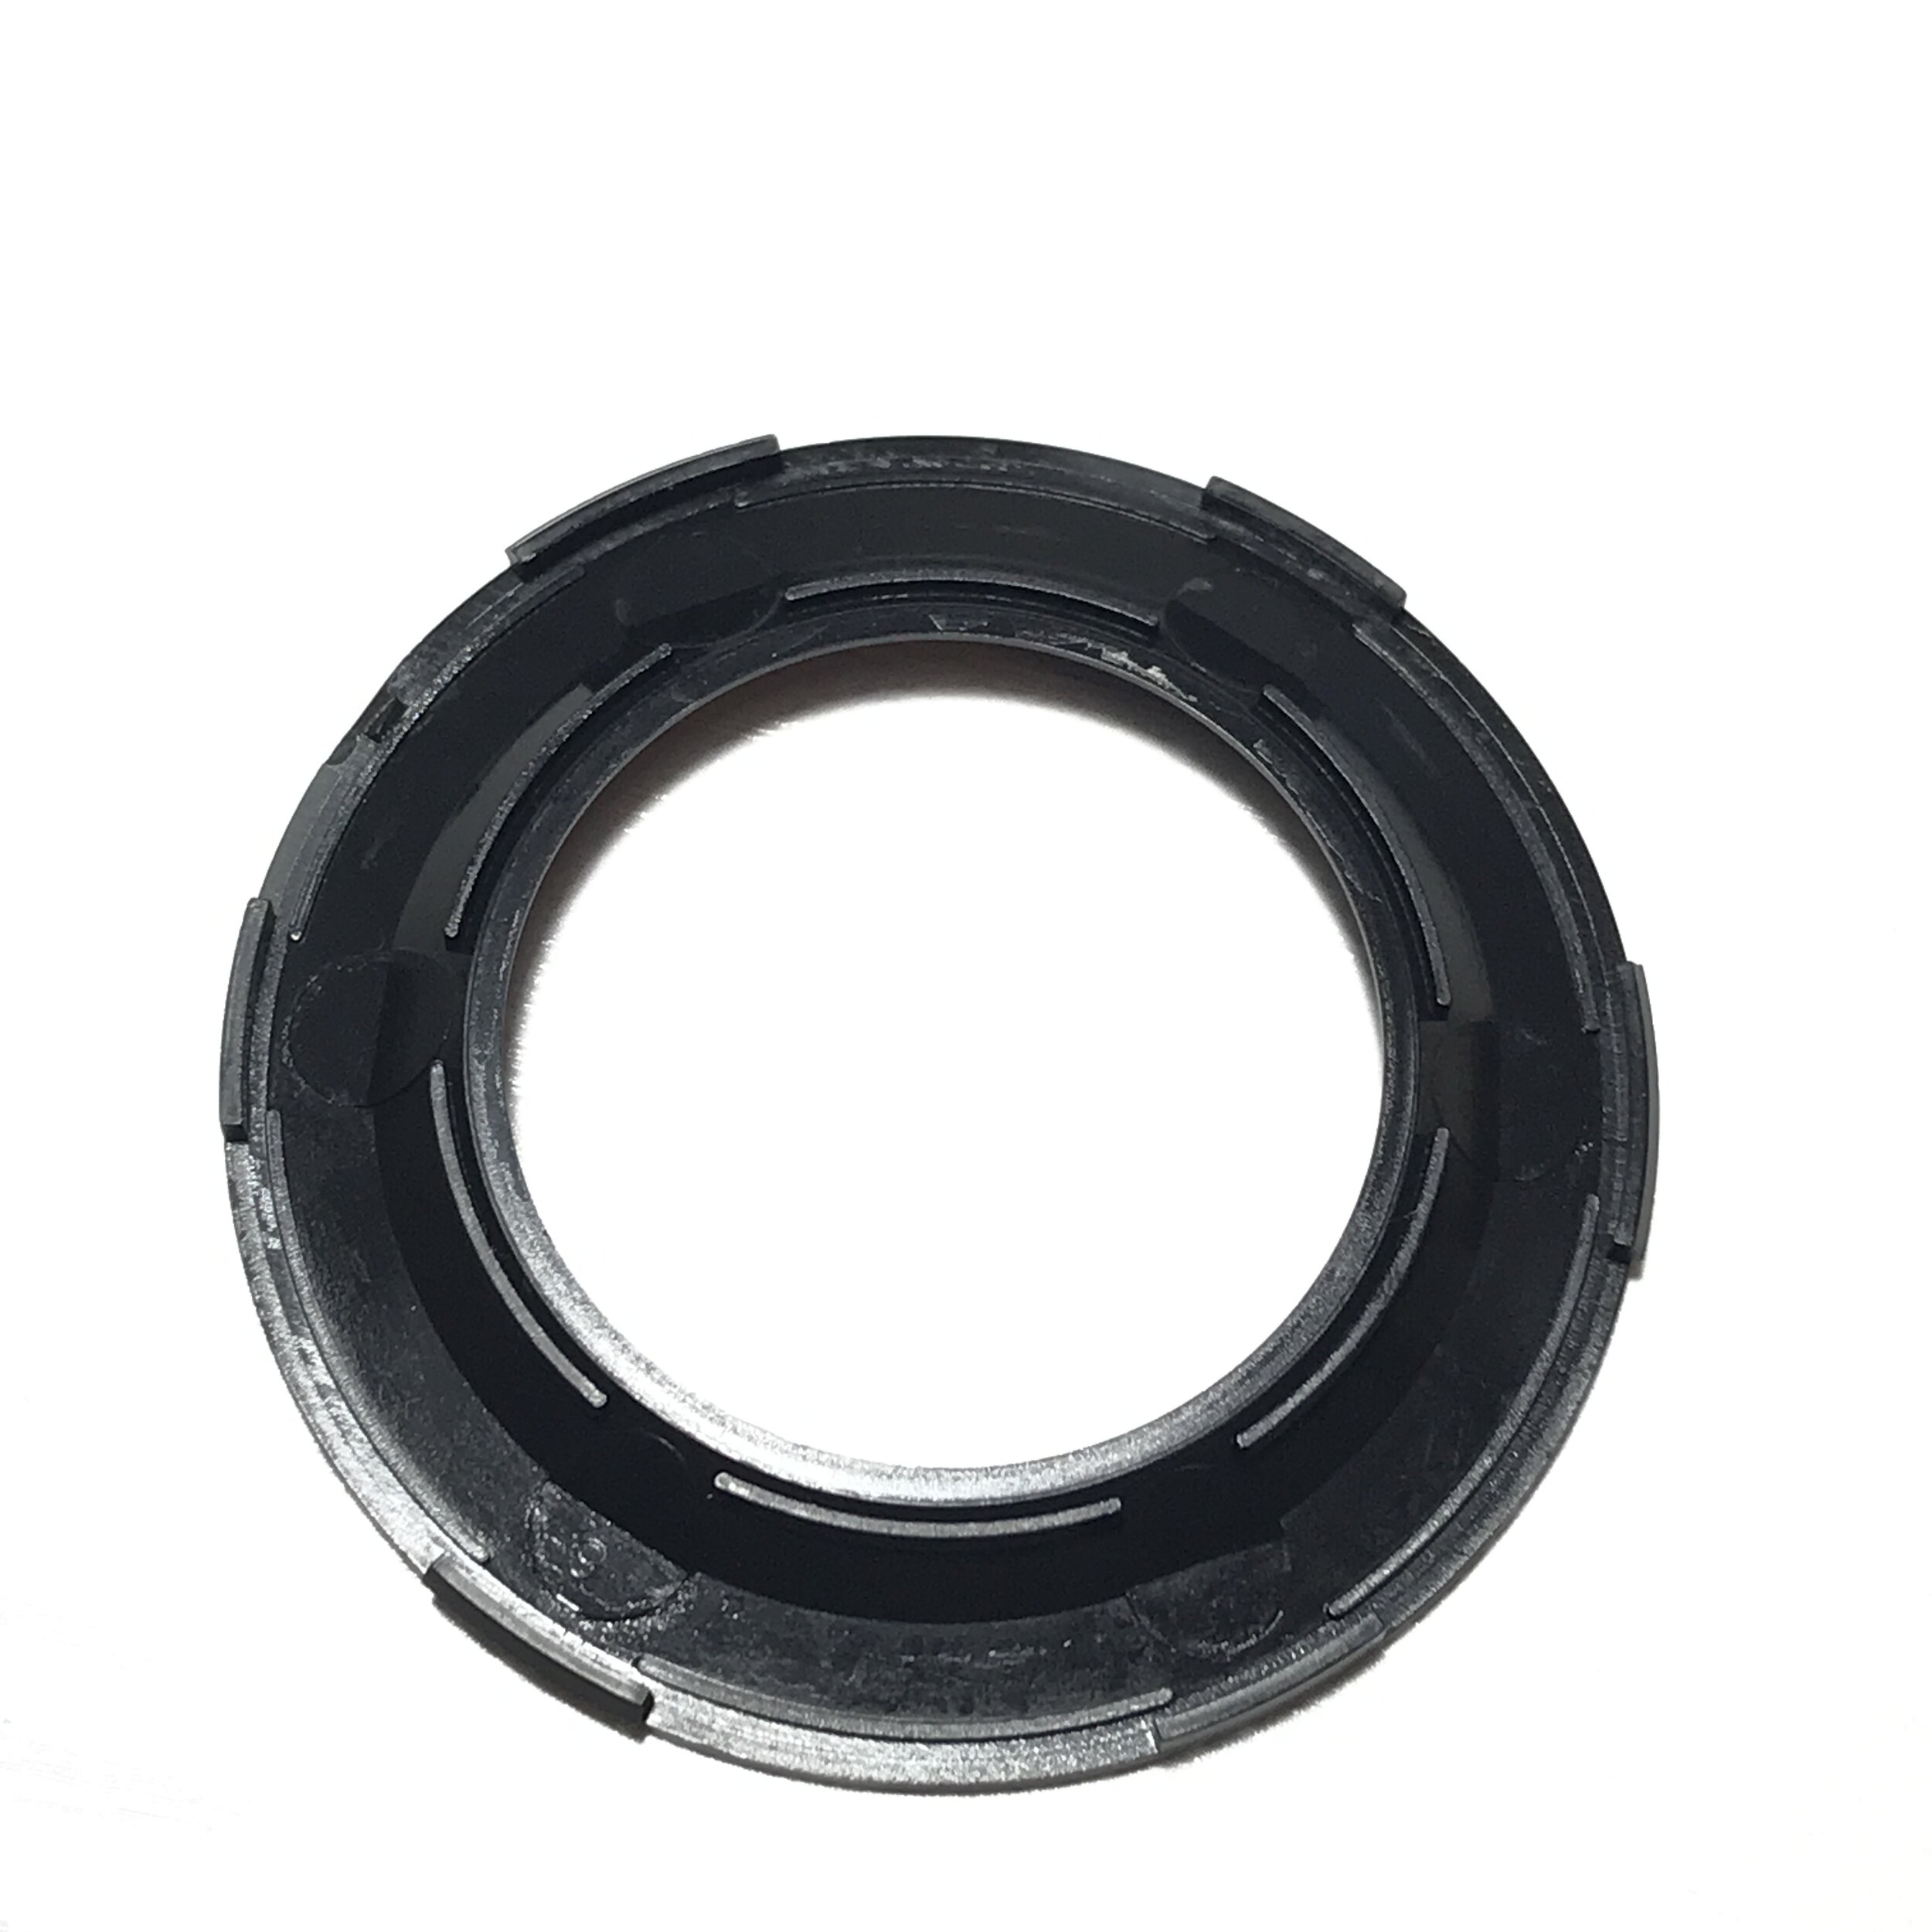 CANON Front Name Ring for FD 50mm f/1.8 Lens New OEM Part CA2-0629-000 